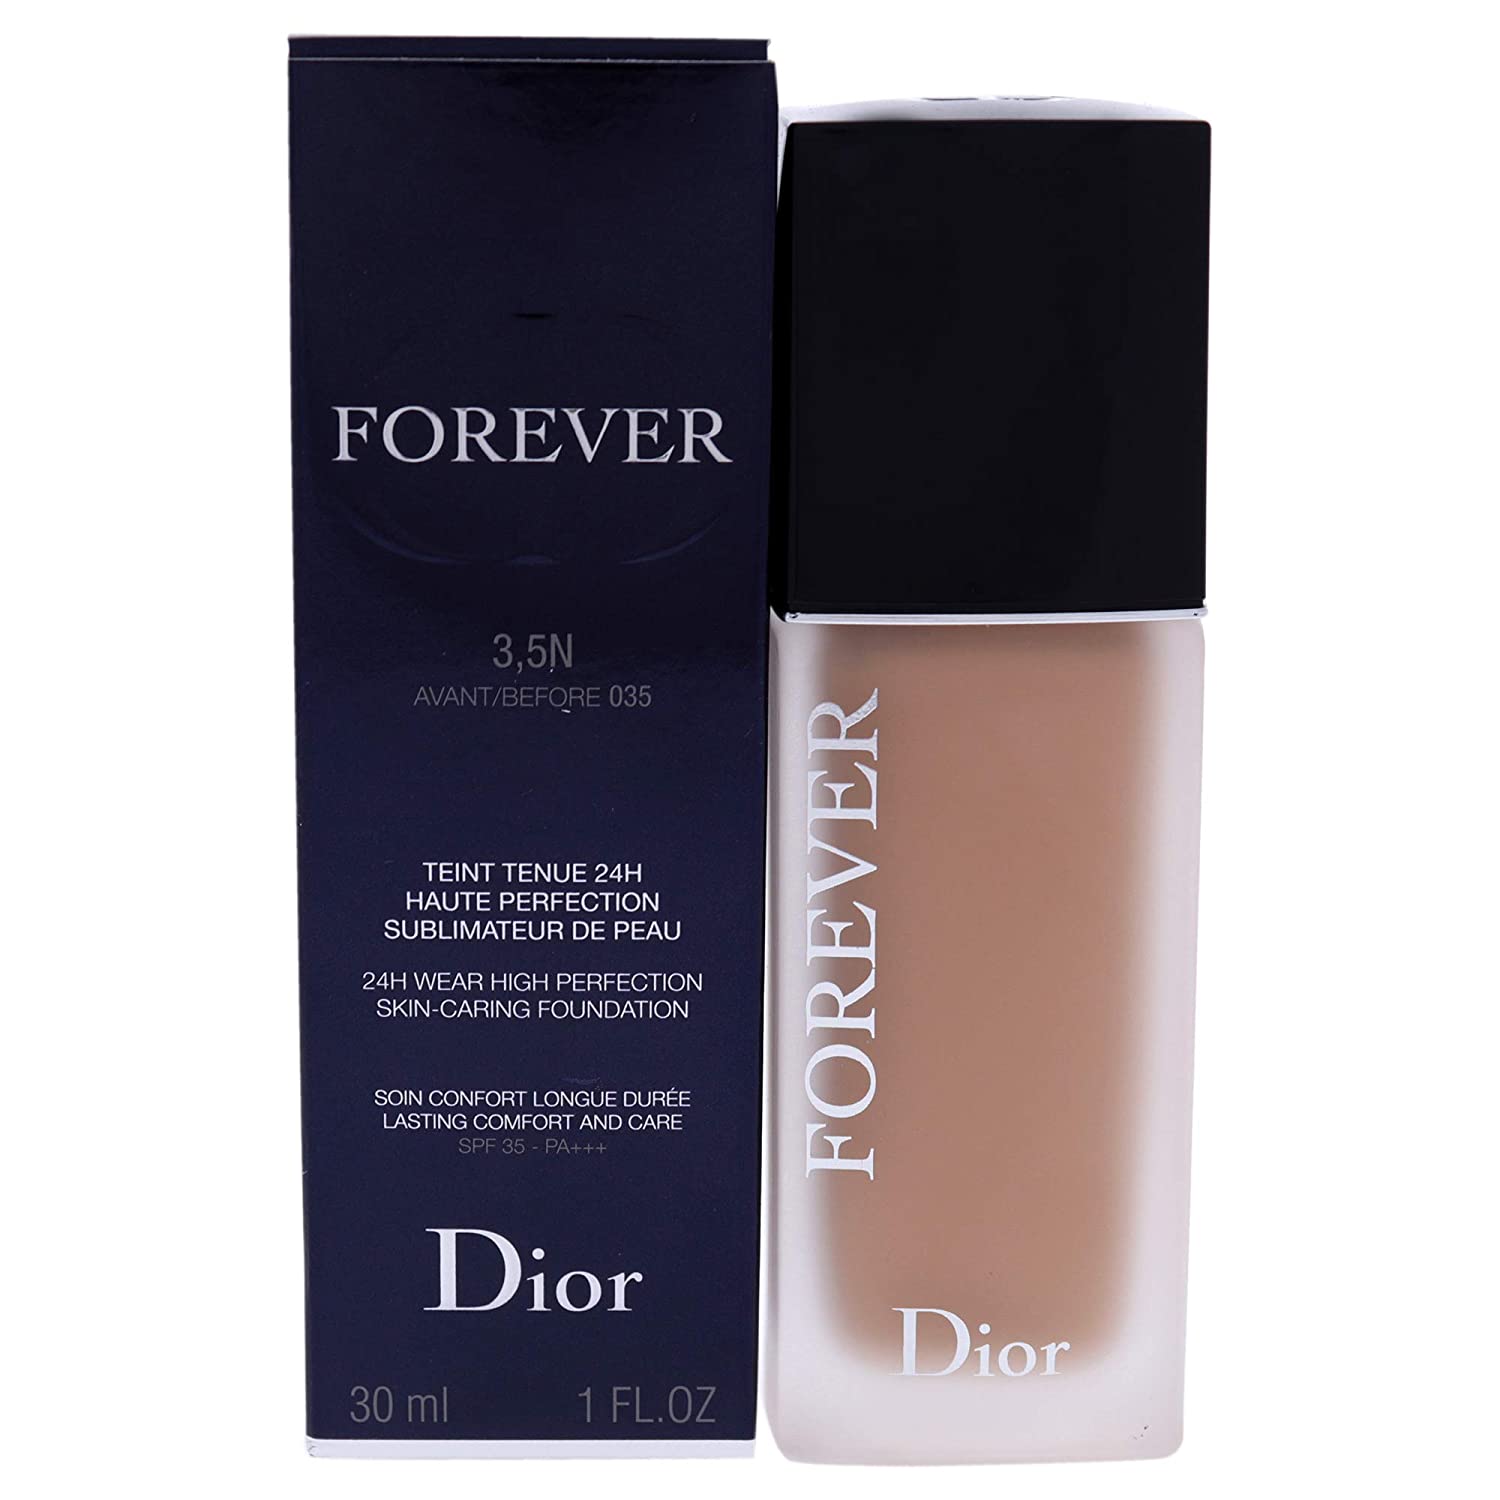 Dior Foundation Foundation Pack of 1 (1 x 30 ml)